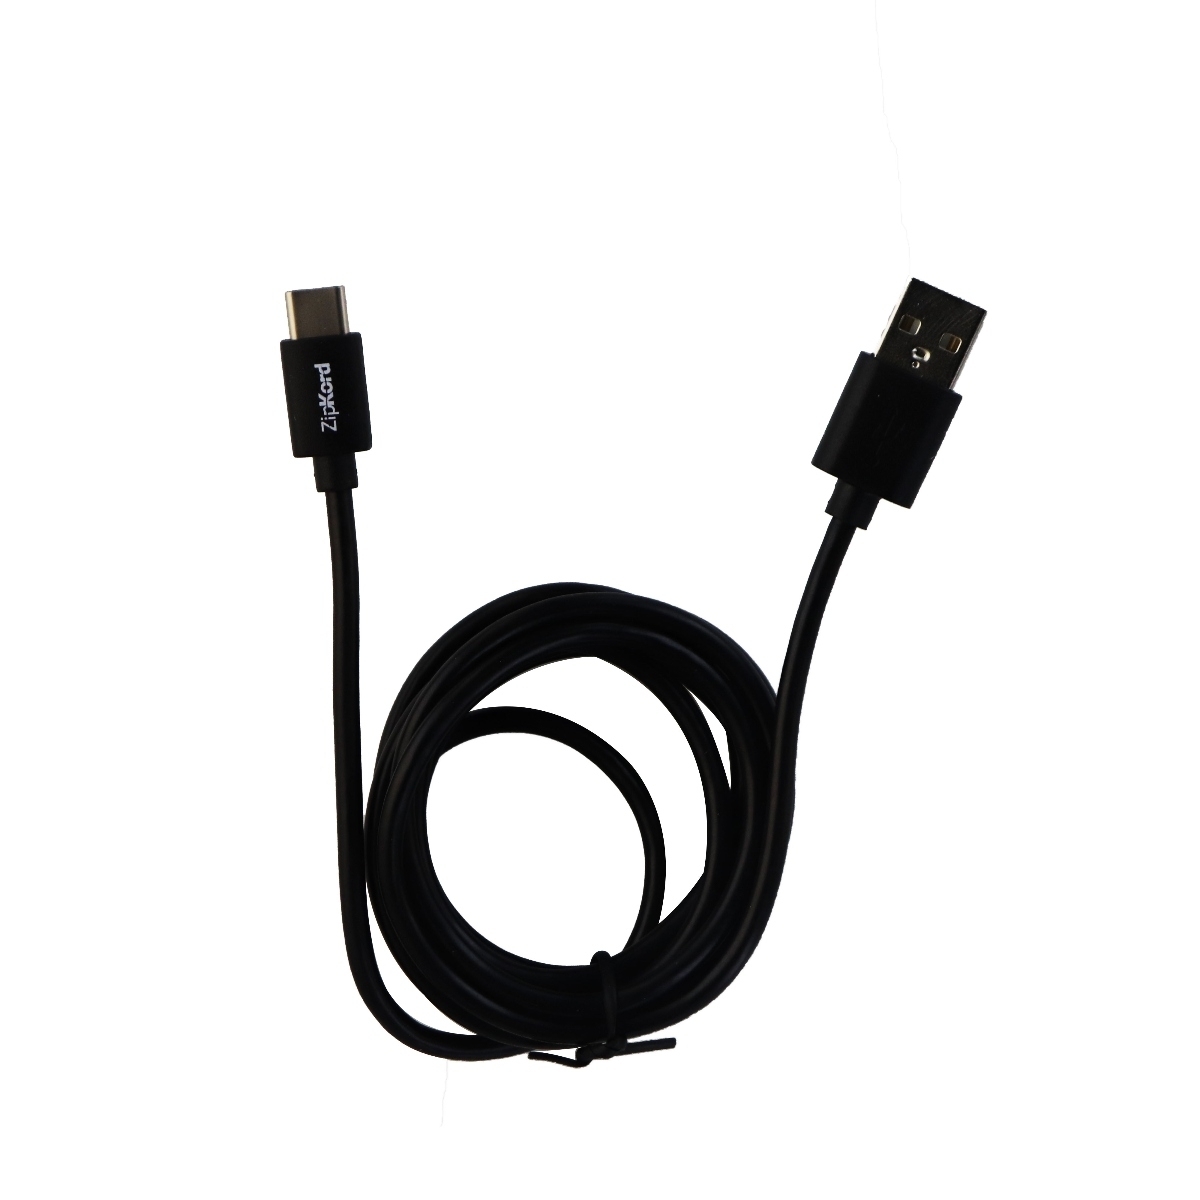 ZipKord (Z113001) 5Ft Charge & Sync Cable For USB-C Devices - Black